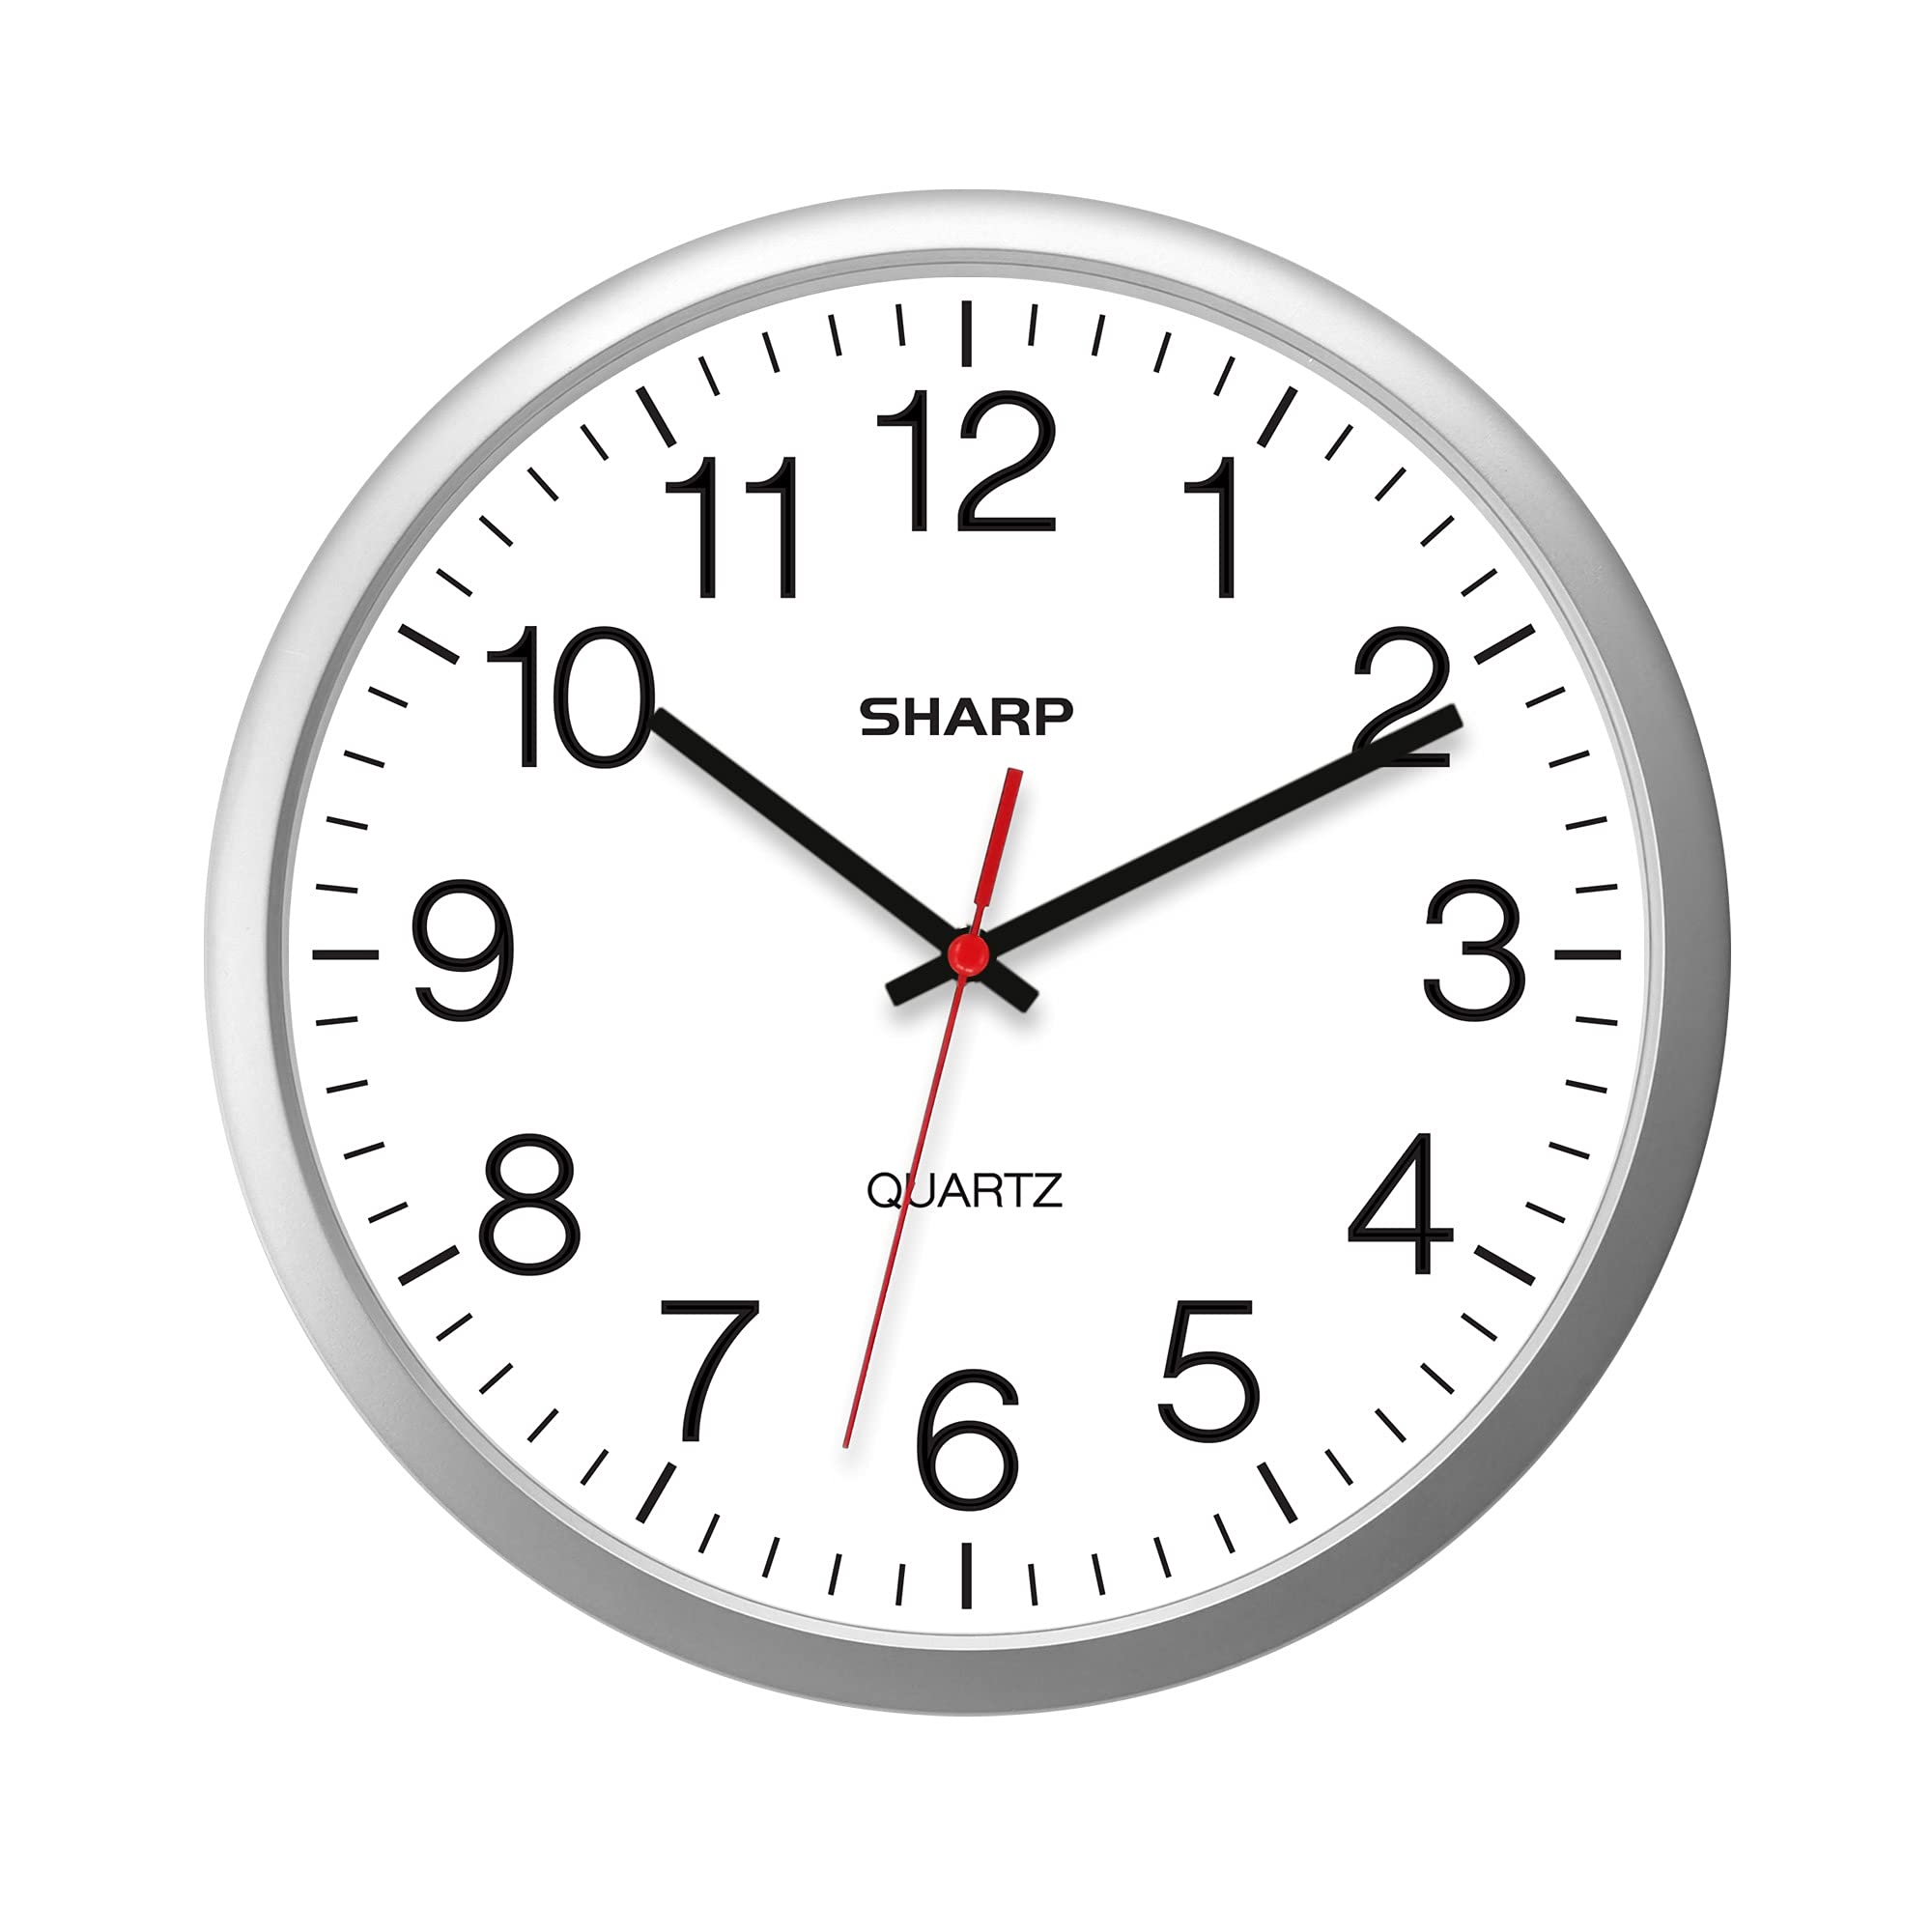 SHARP Wall Clock – Silver, Silent Non Ticking 14 Inch Quality Quartz Battery Operated Round Easy to Read Home/Kitchen/Office/Classroom/School Clocks, Sweep Movement Silver 14"